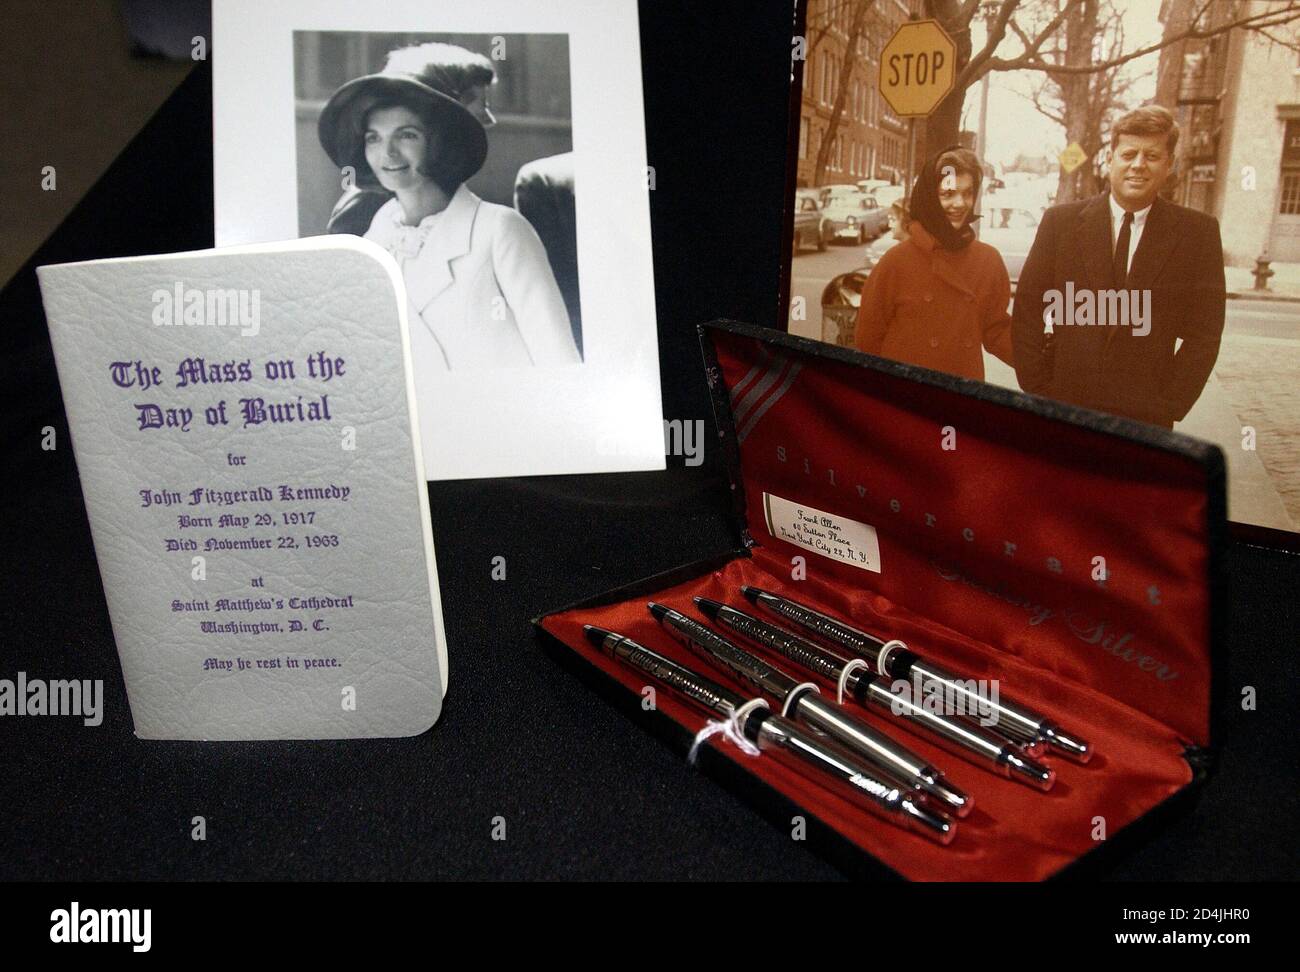 Photographs, pens and a booklet from the final memorial for JFK on display as part of the items for auction belonging to President and Mrs. Kennedy on July 18, 2003.    auction, at Dawson's Auctioneers & Appraisers in Morris Plains, New Jersey, will include more than 300 items ranging from the whimsical, [World War II Navy-issue boxer shorts, with the sown label, 'Jack Kennedy', to the historic, a personal presidential campaign notebook.] Stock Photo